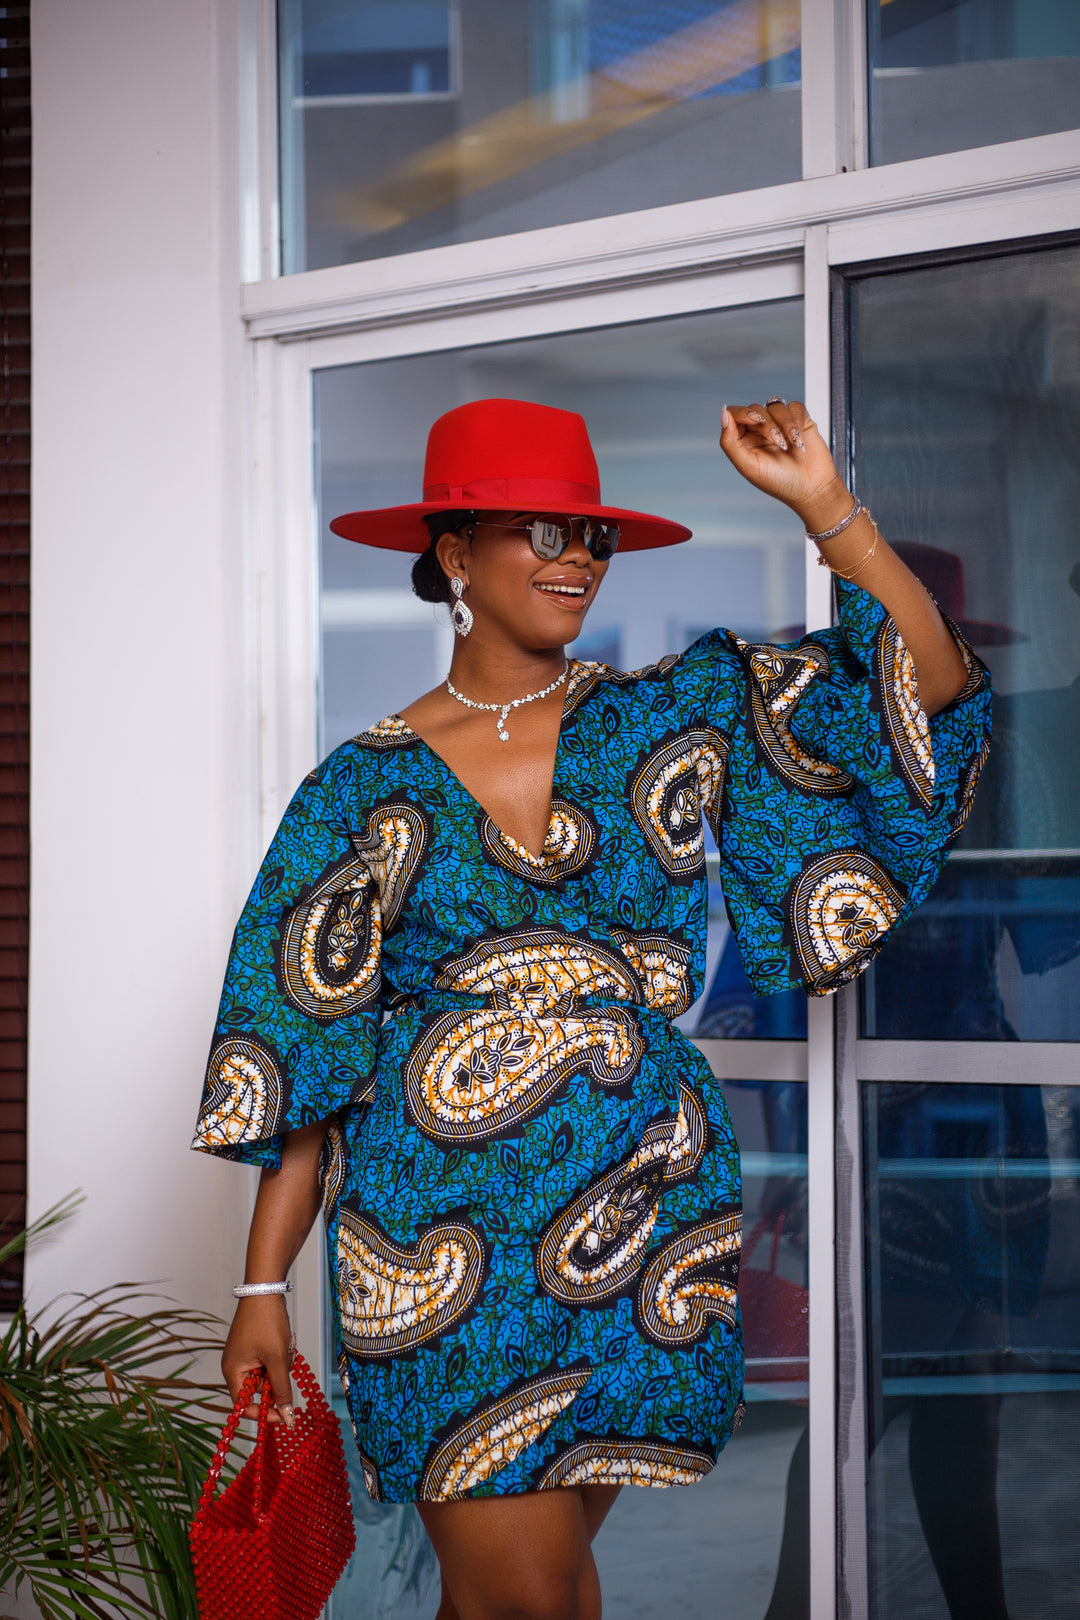 A woman posing in a blue and tan African print mini dress. She is pictured from the waist up and smiling. She is styled with a red beaded purse, a red sun hat, and silver jewelry.